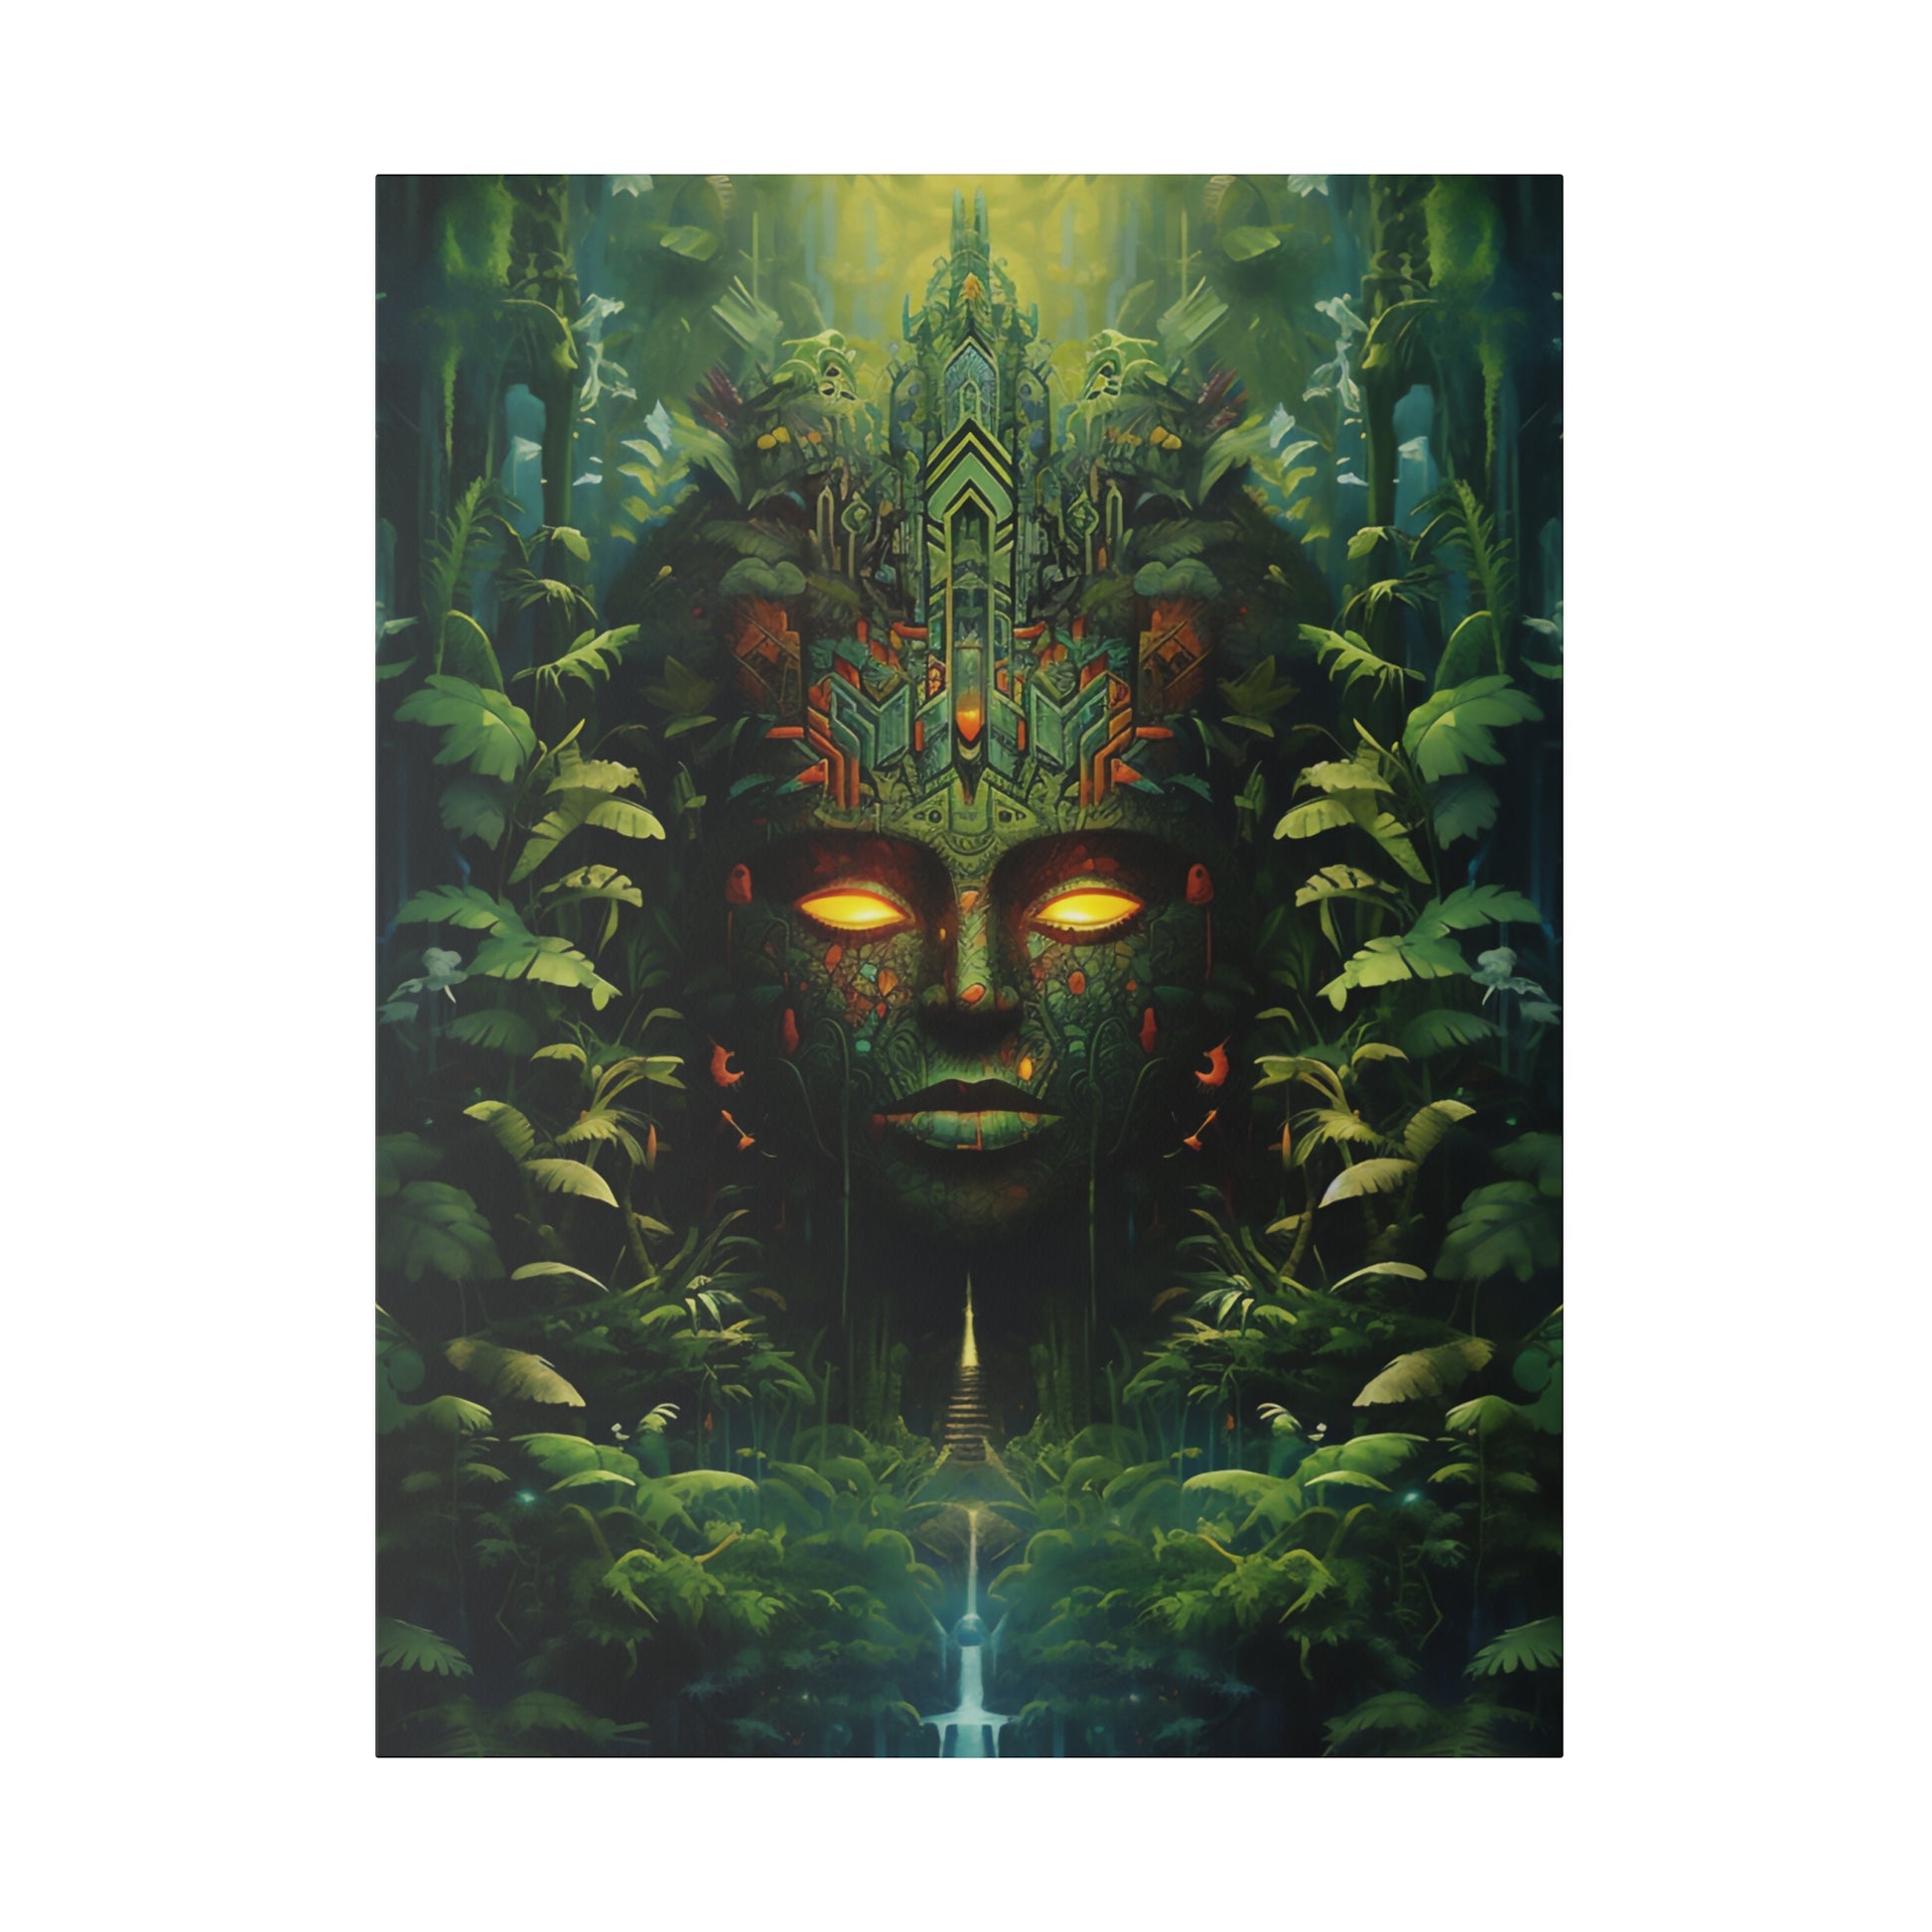 Ayahuasca-Inspired Psychedelic Art Nature Nymph Portrait - Vibrant Stretched Canvas Print